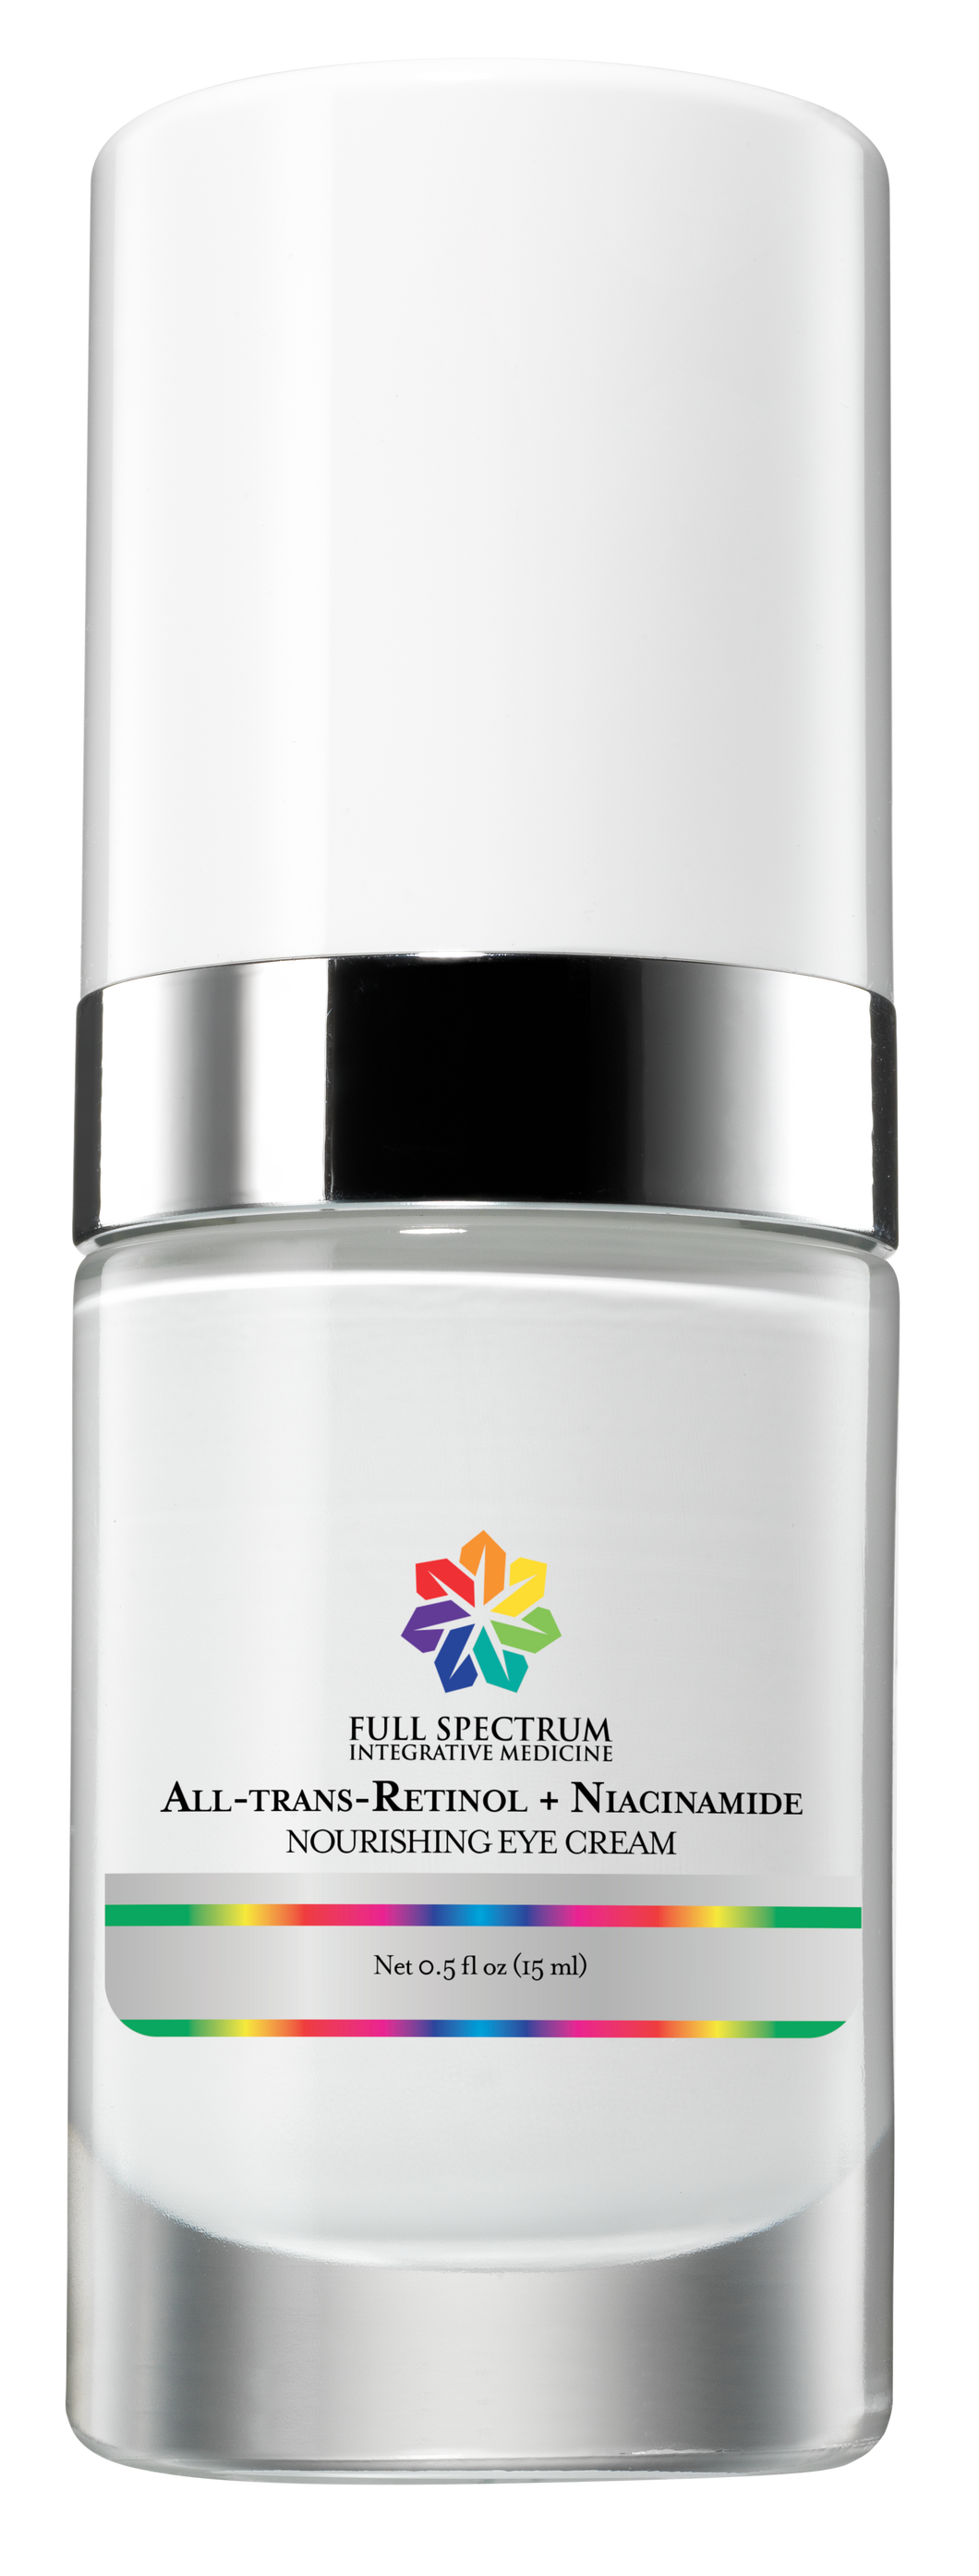 All-Trans-Retinol + Niacinamide Nourishing Eye Cream is formulated with All-Trans-Retinol and 90% green tea polyphenols, this ultra-moisturizing cream targets fine lines, dark circles, and puffiness to achieve smoother, firmer skin around the delicate eye area.  